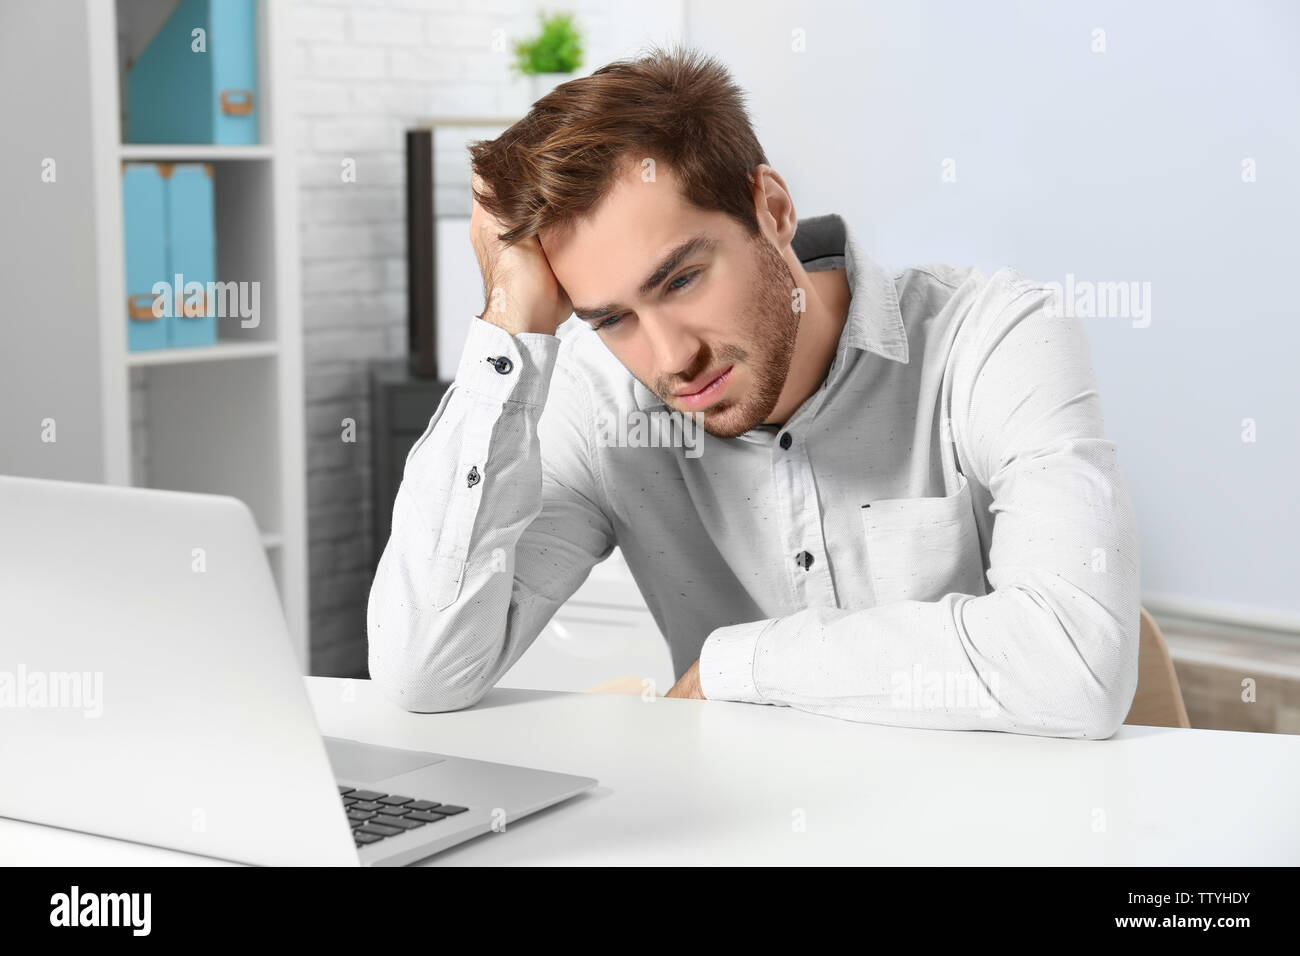 Tired handsome man working with laptop in office Stock Photo